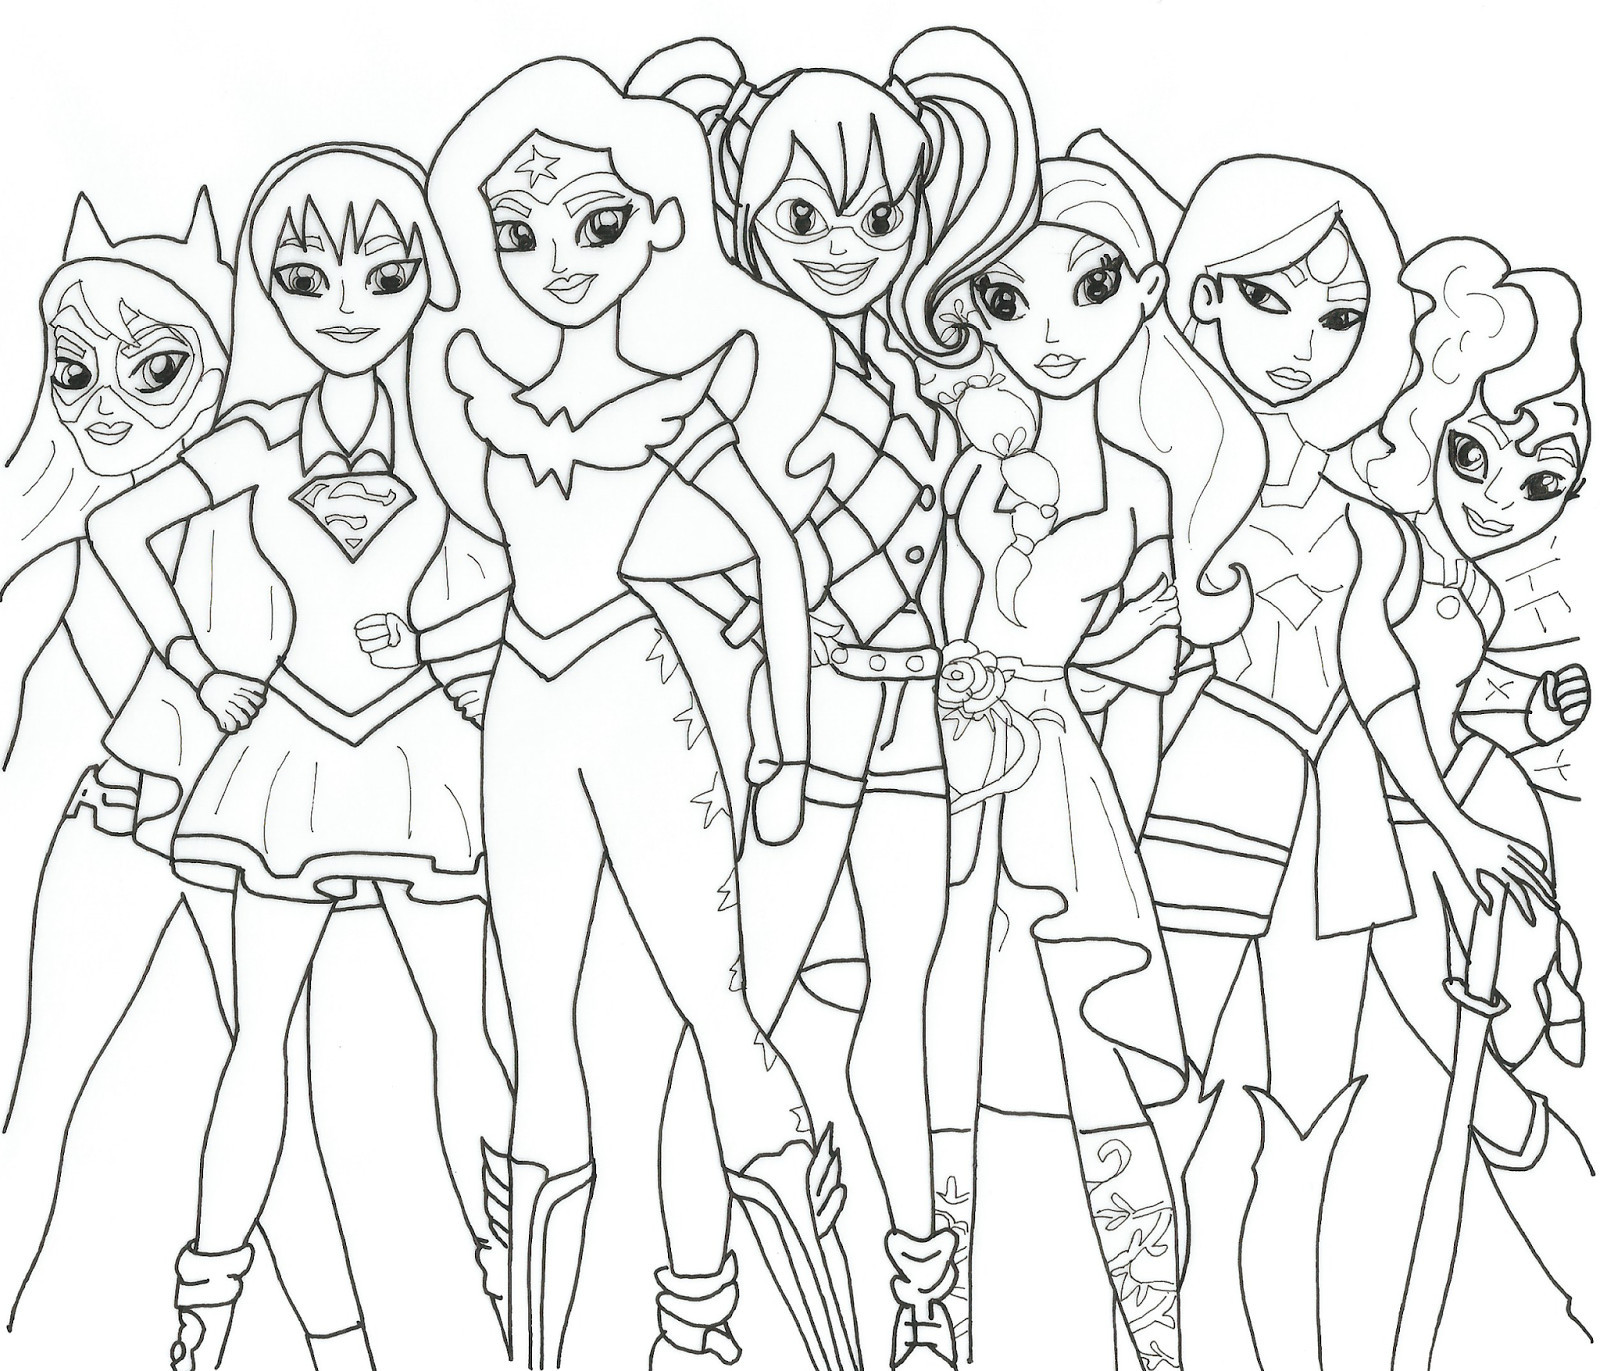 Dc Super Hero Girls Coloring Pages
 Dc Superhero Girls Coloring Sheets thekindproject